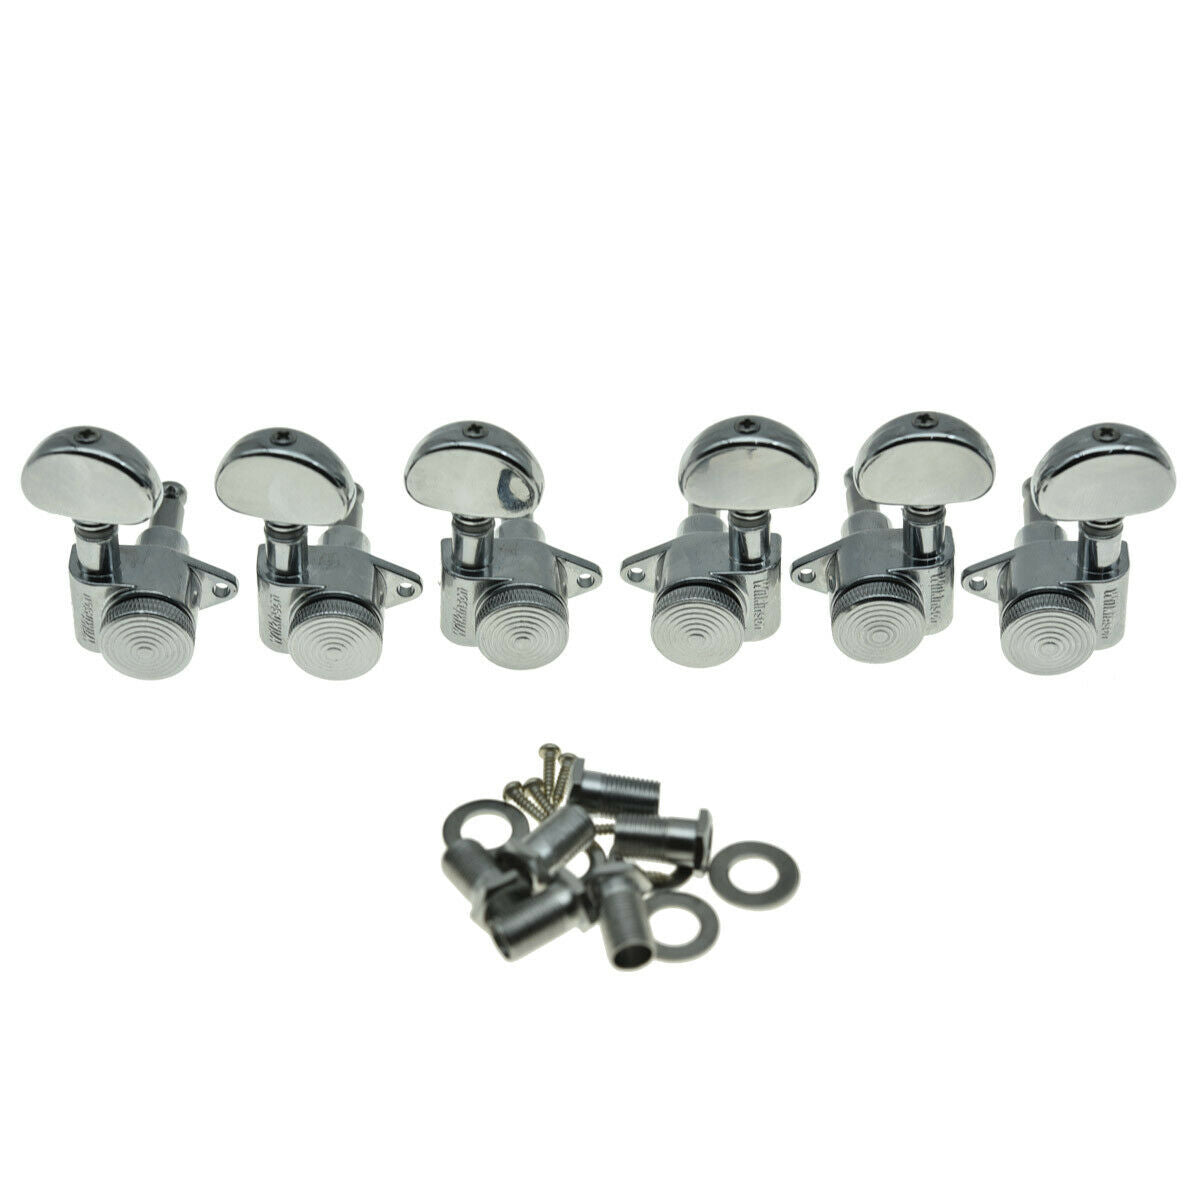 Wilkinson Locking Guitar Tuners 3x3 Tuning Keys for Gibson or Acoustic Chrome